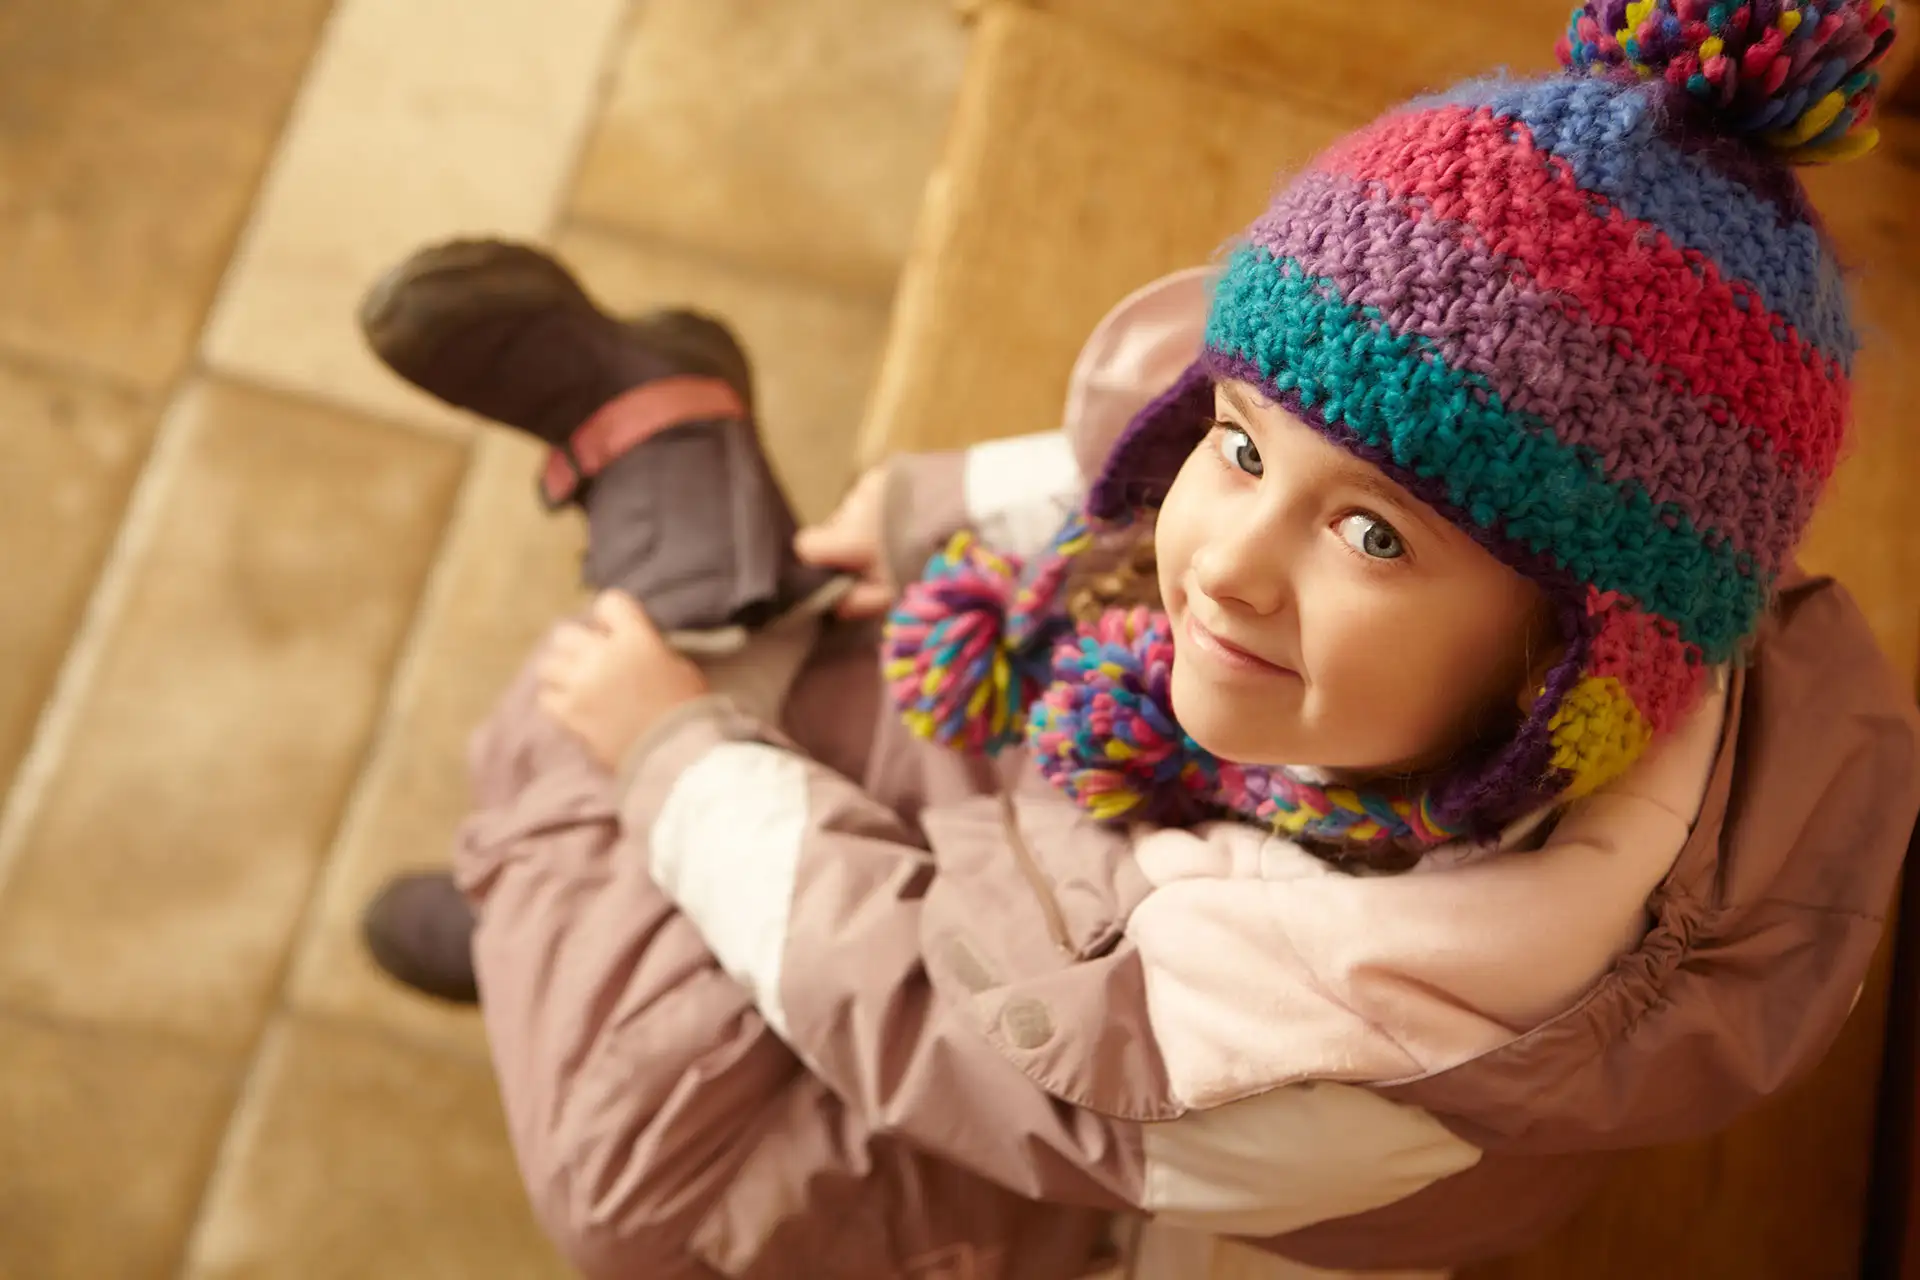 A little girl getting ready to hit the slopes.; Courtesy of Monkey Business Images/Shutterstock.com